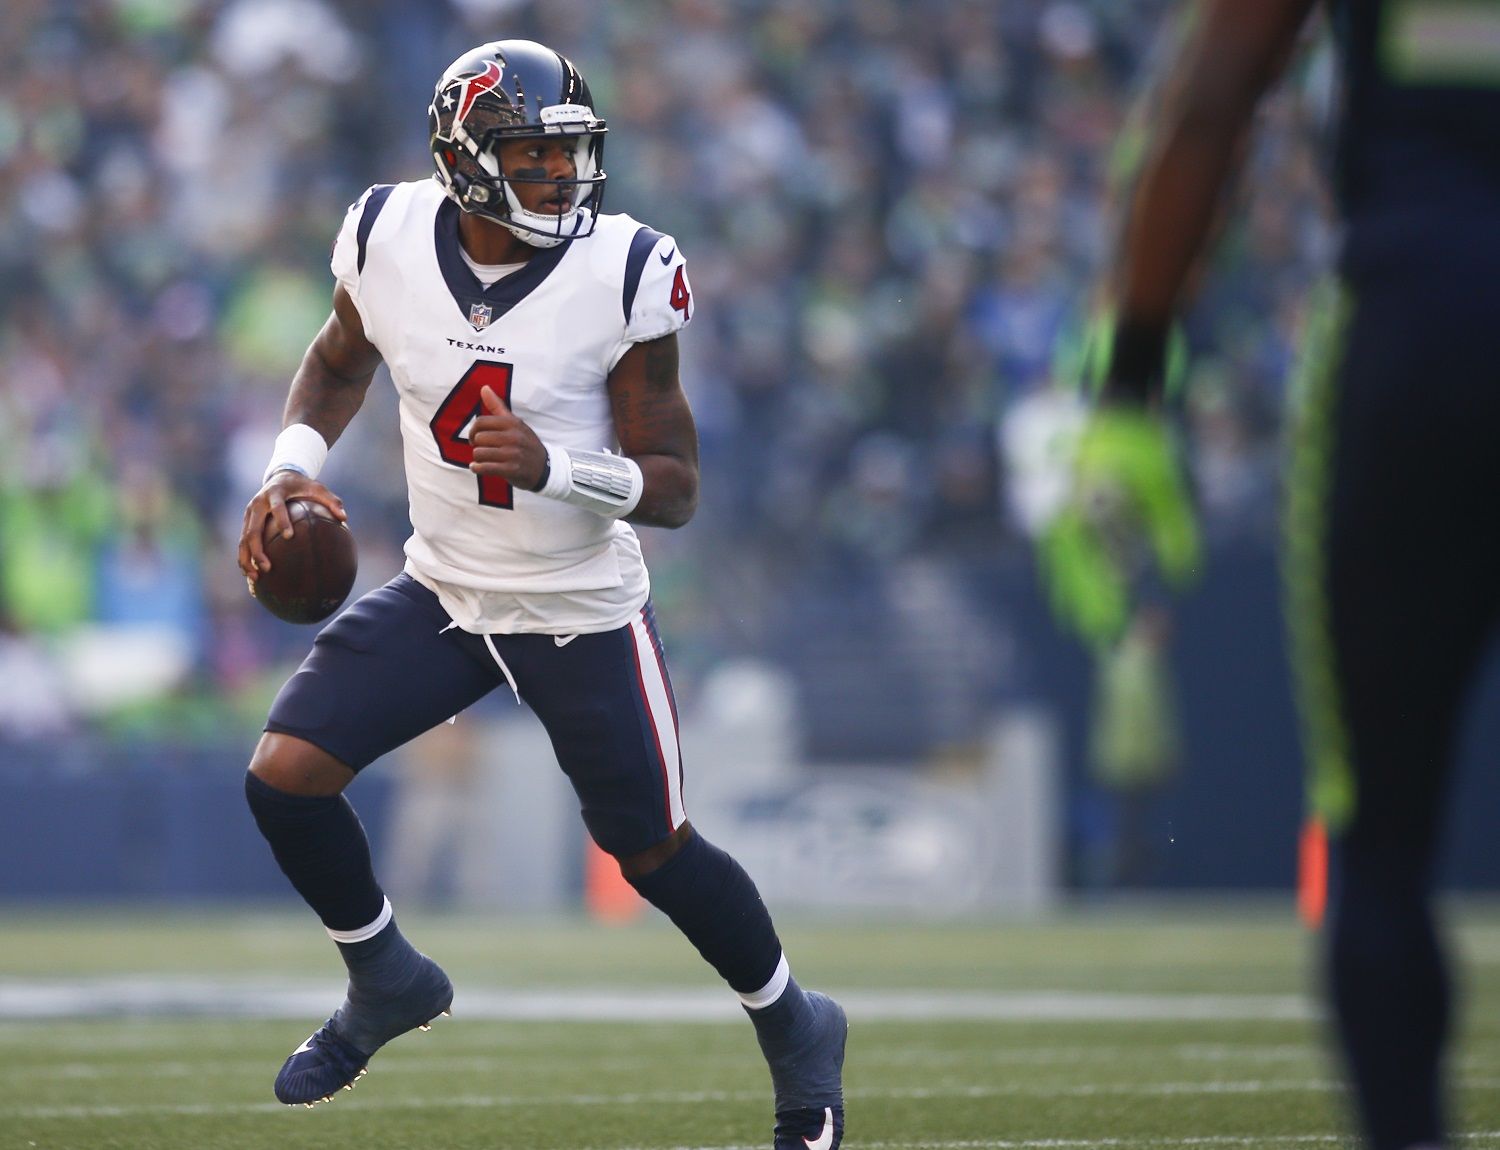 SEATTLE, WA - OCTOBER 29:  Quarterback Deshaun Watson #4 of the Houston Texans rushes against the Seattle Seahawks at CenturyLink Field on October 29, 2017 in Seattle, Washington. (Photo by Jonathan Ferrey/Getty Images)